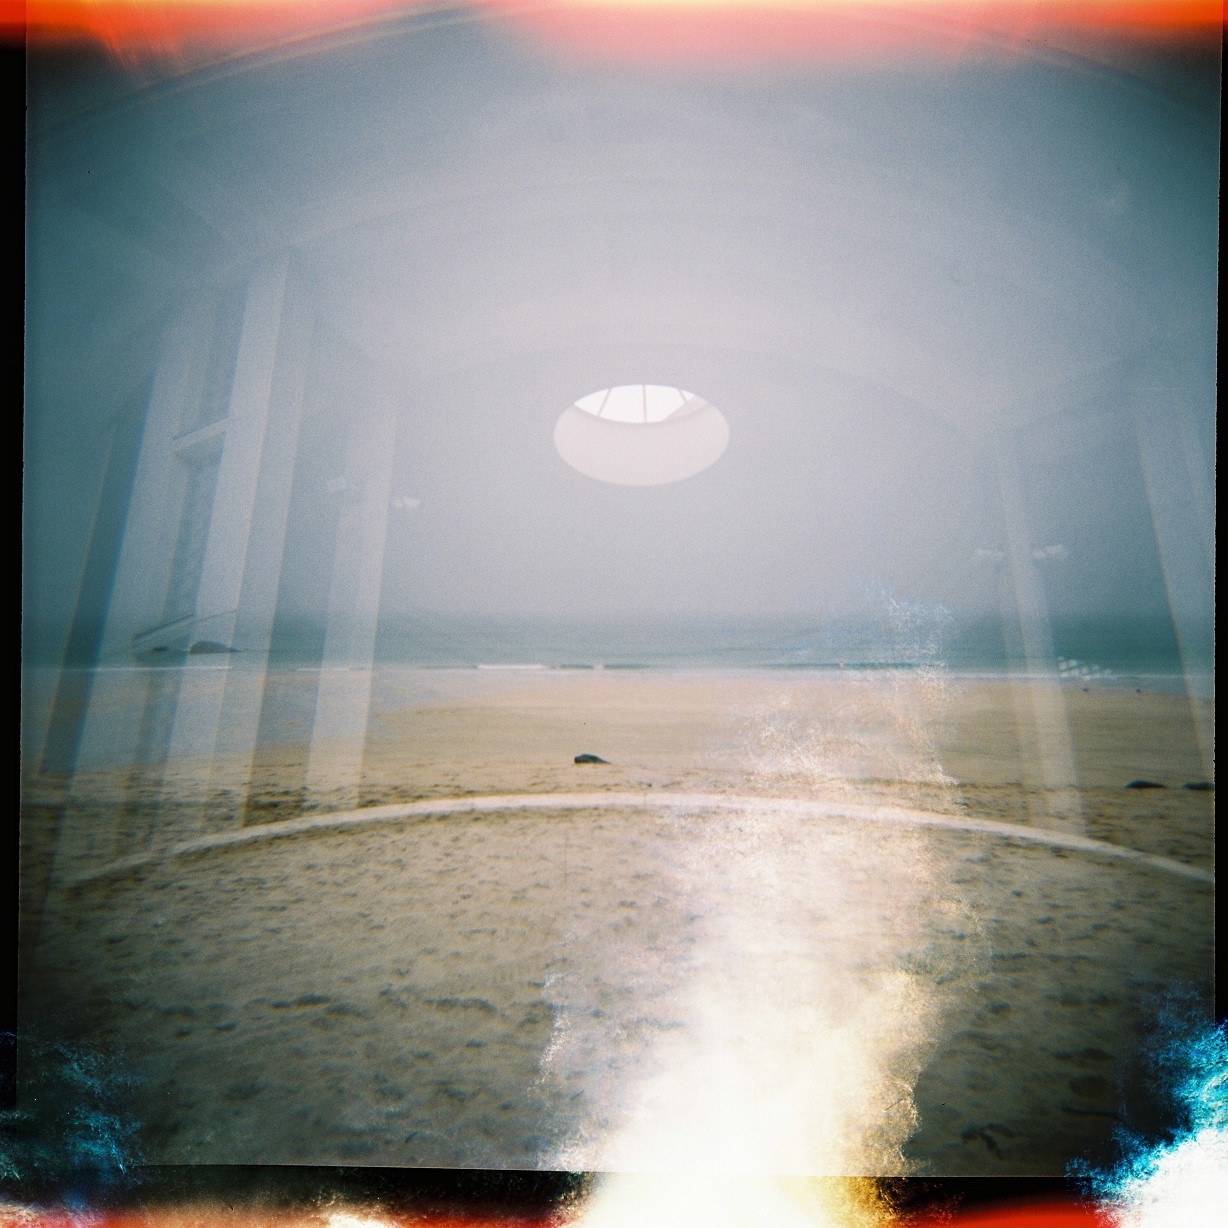 Lomography Tate St Ives, Cornwall